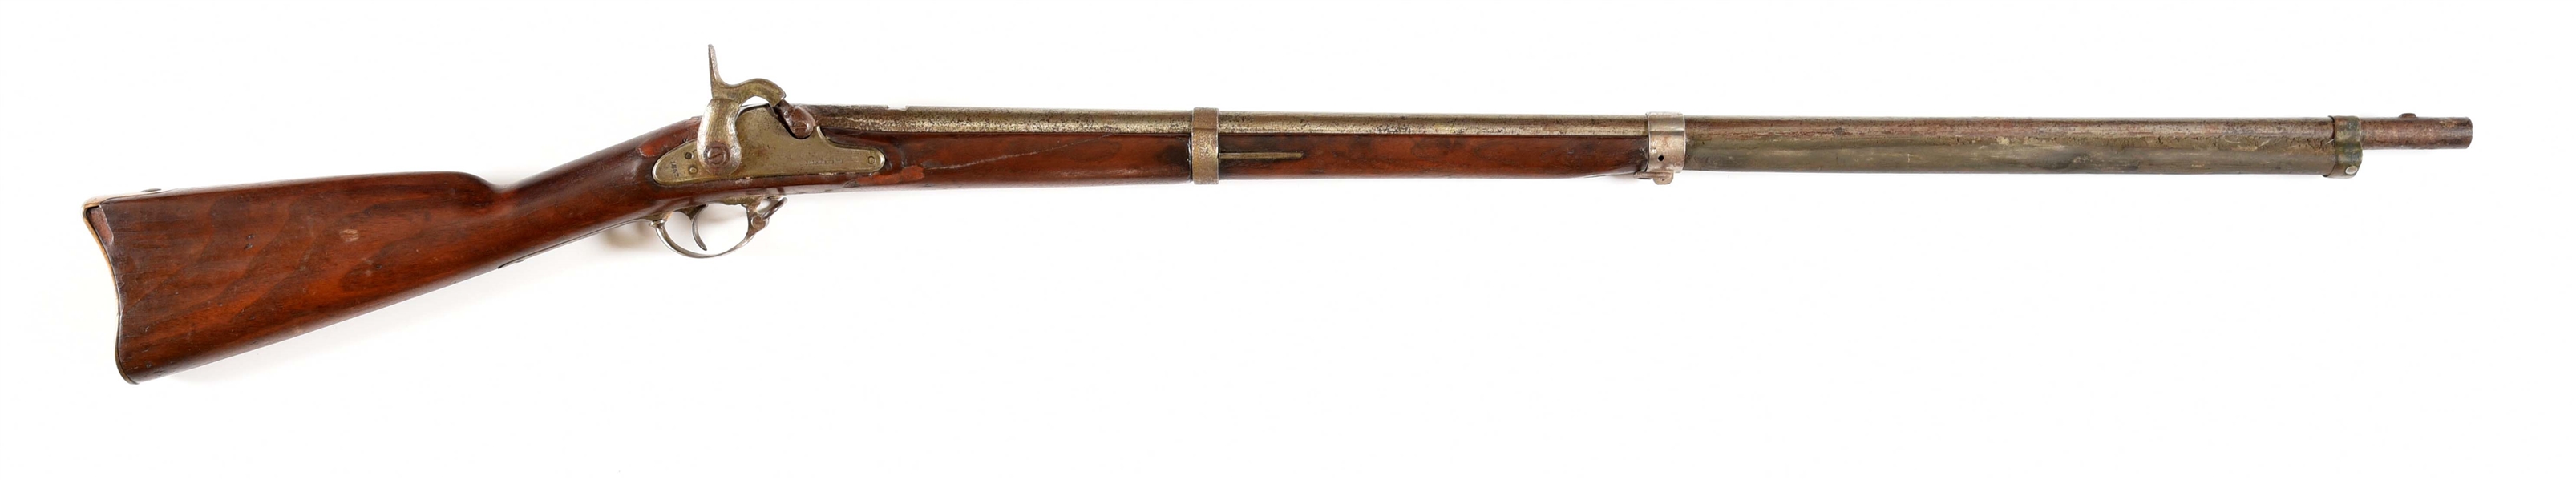 (A) ASSEMBLED COMPOSITE PERCUSSION MUSKET.